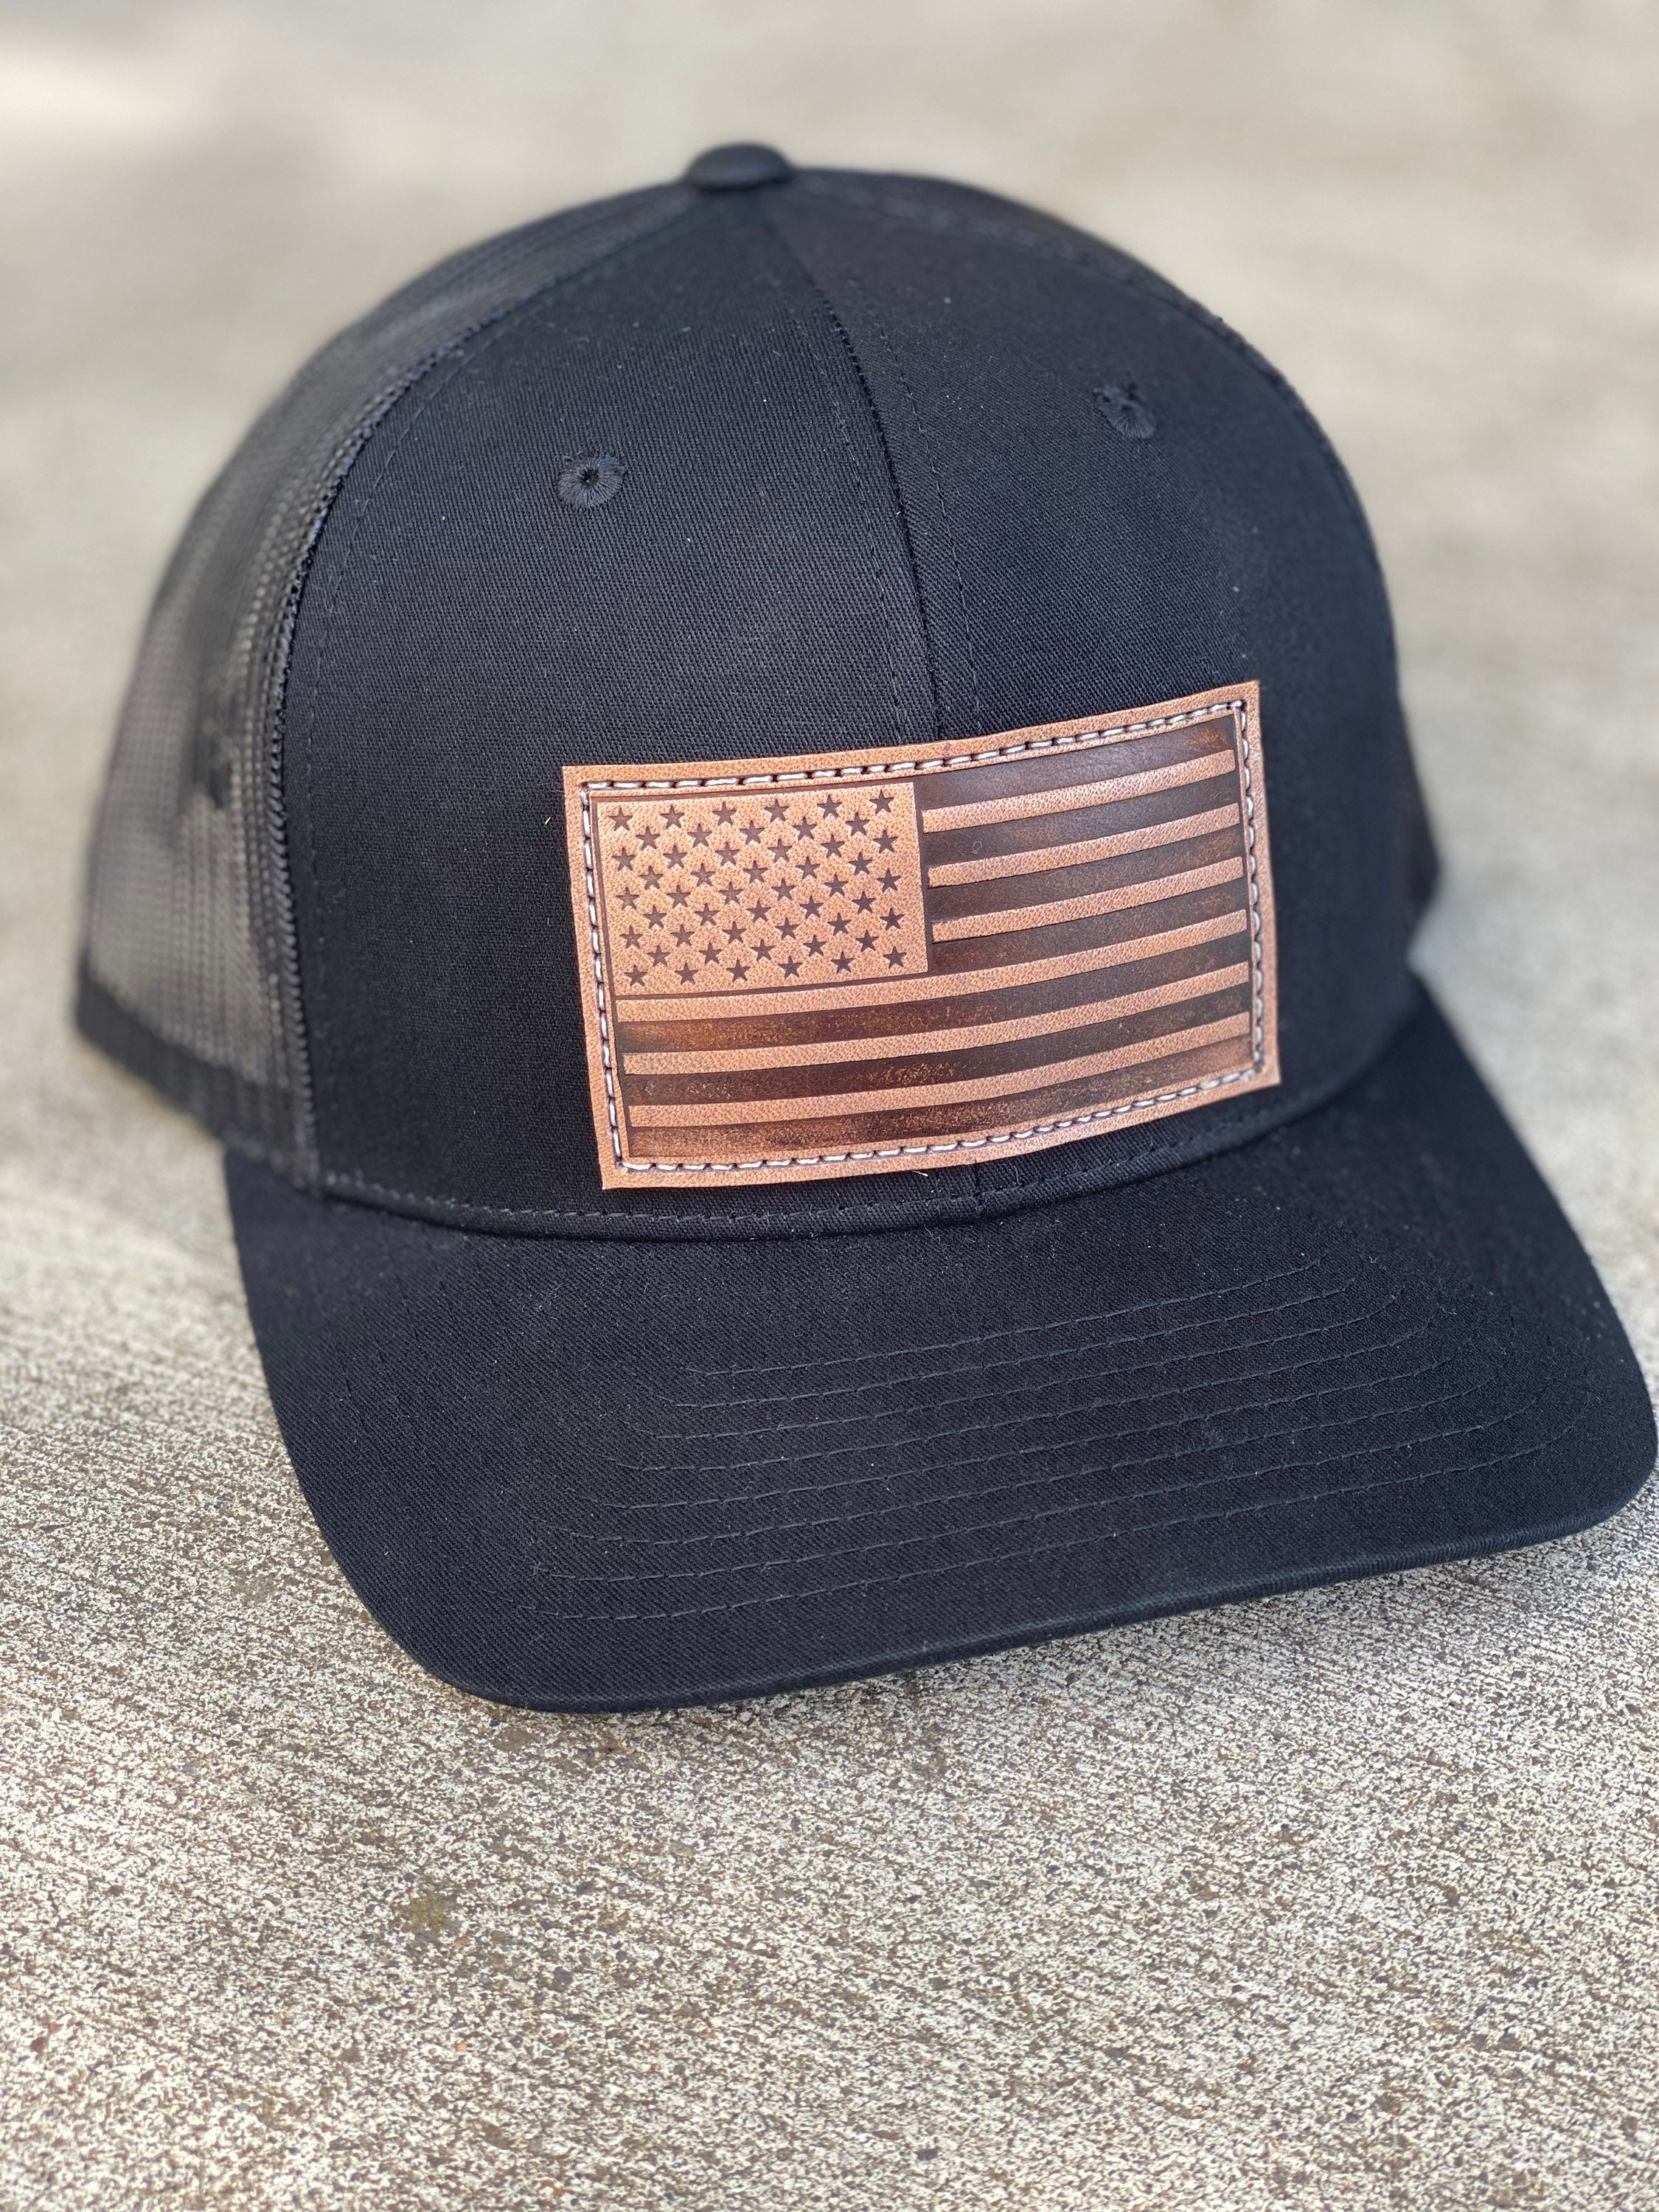 Solid Black Hat with American Flag Leather Patch | Etsy